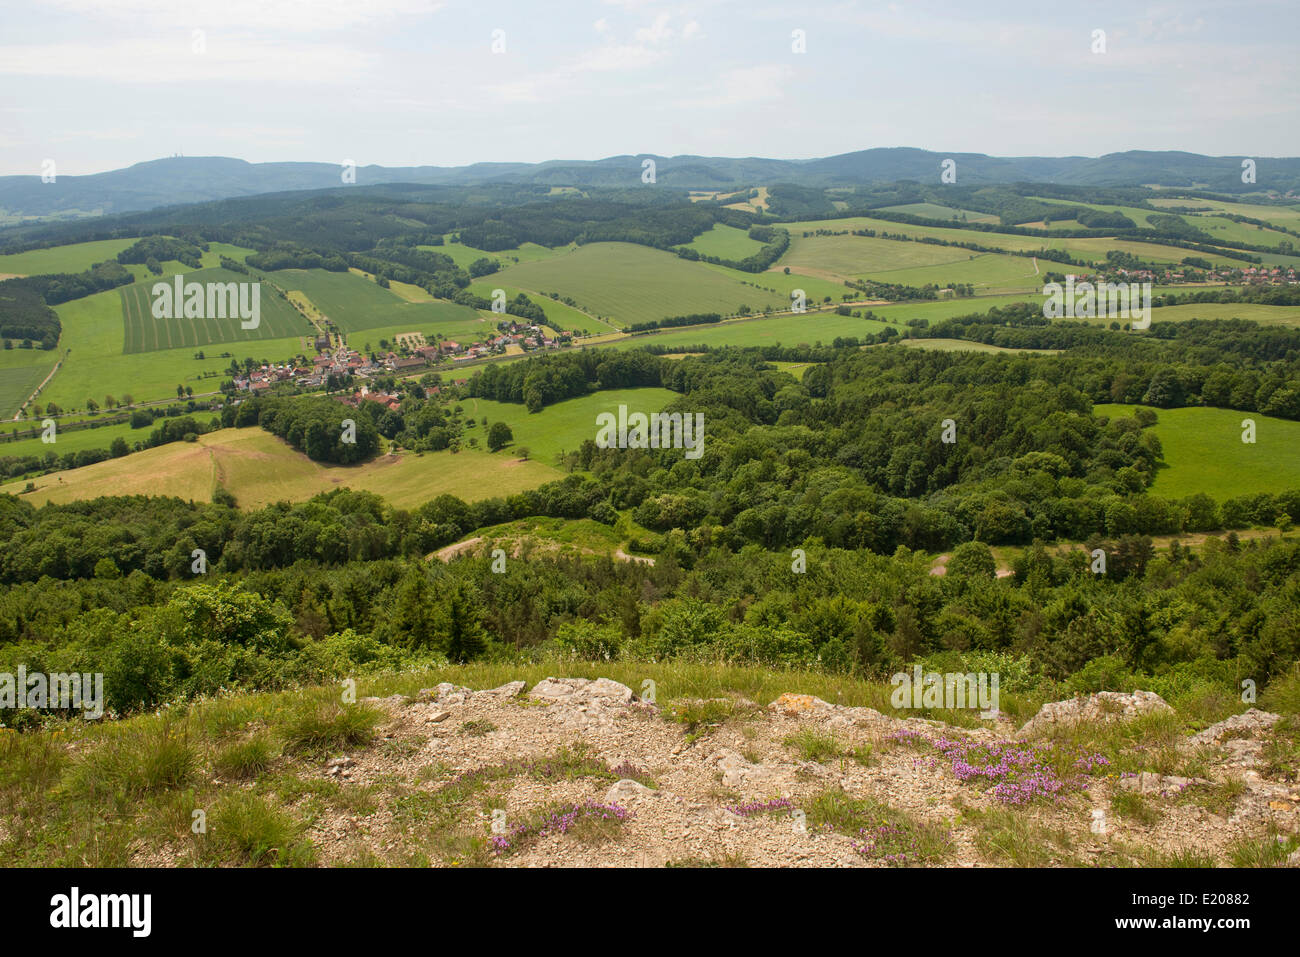 View from Mt Großer Hörselberg towards the Thuringian Forest, near Eisenach, Thuringia, Germany Stock Photo